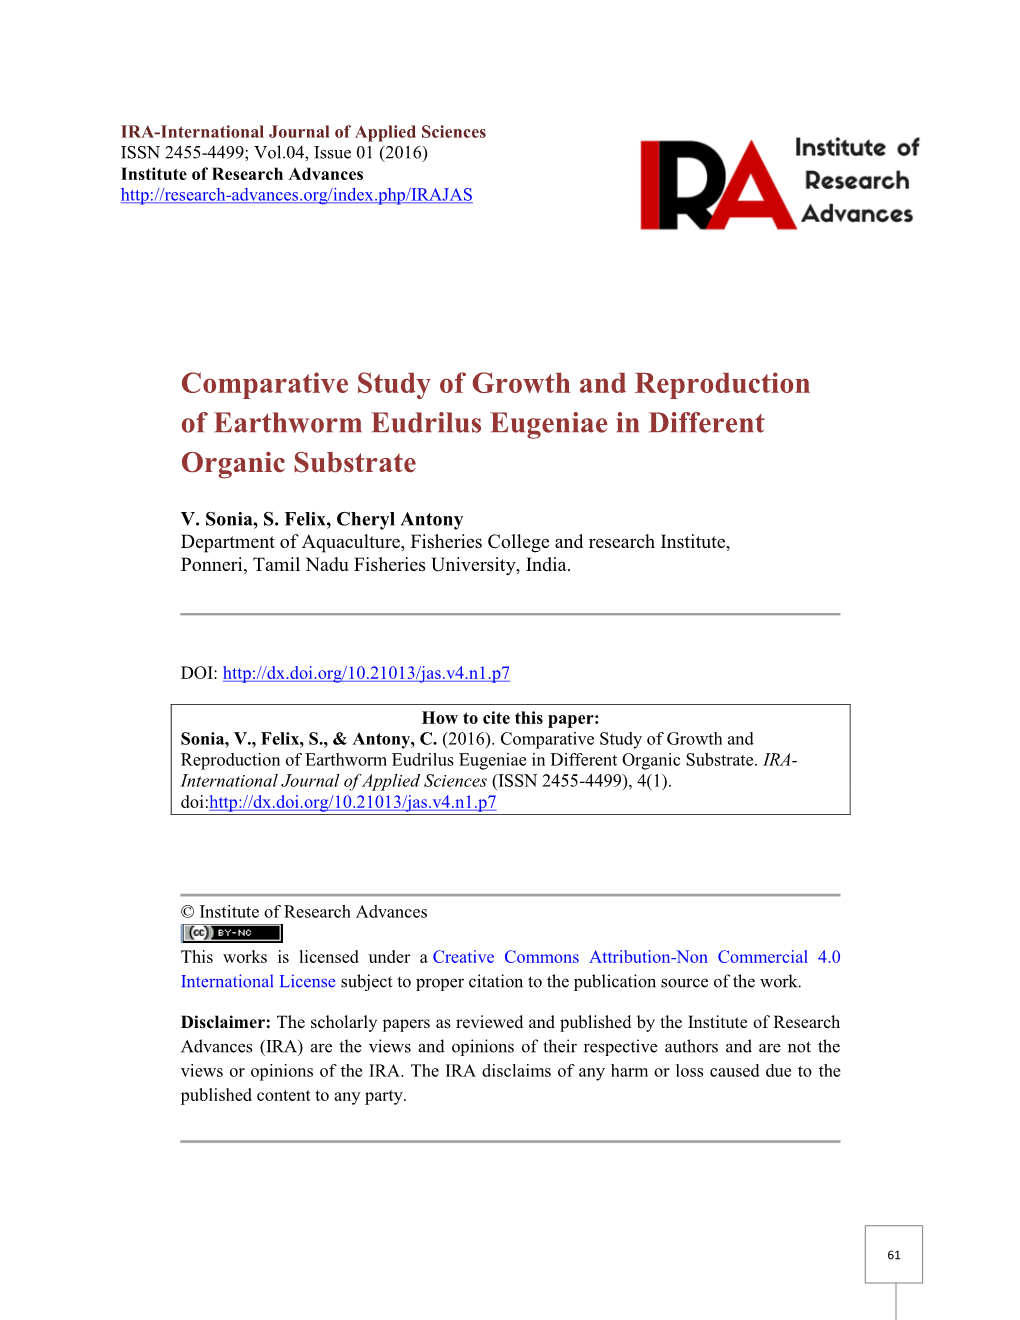 Comparative Study of Growth and Reproduction of Earthworm Eudrilus Eugeniae in Different Organic Substrate